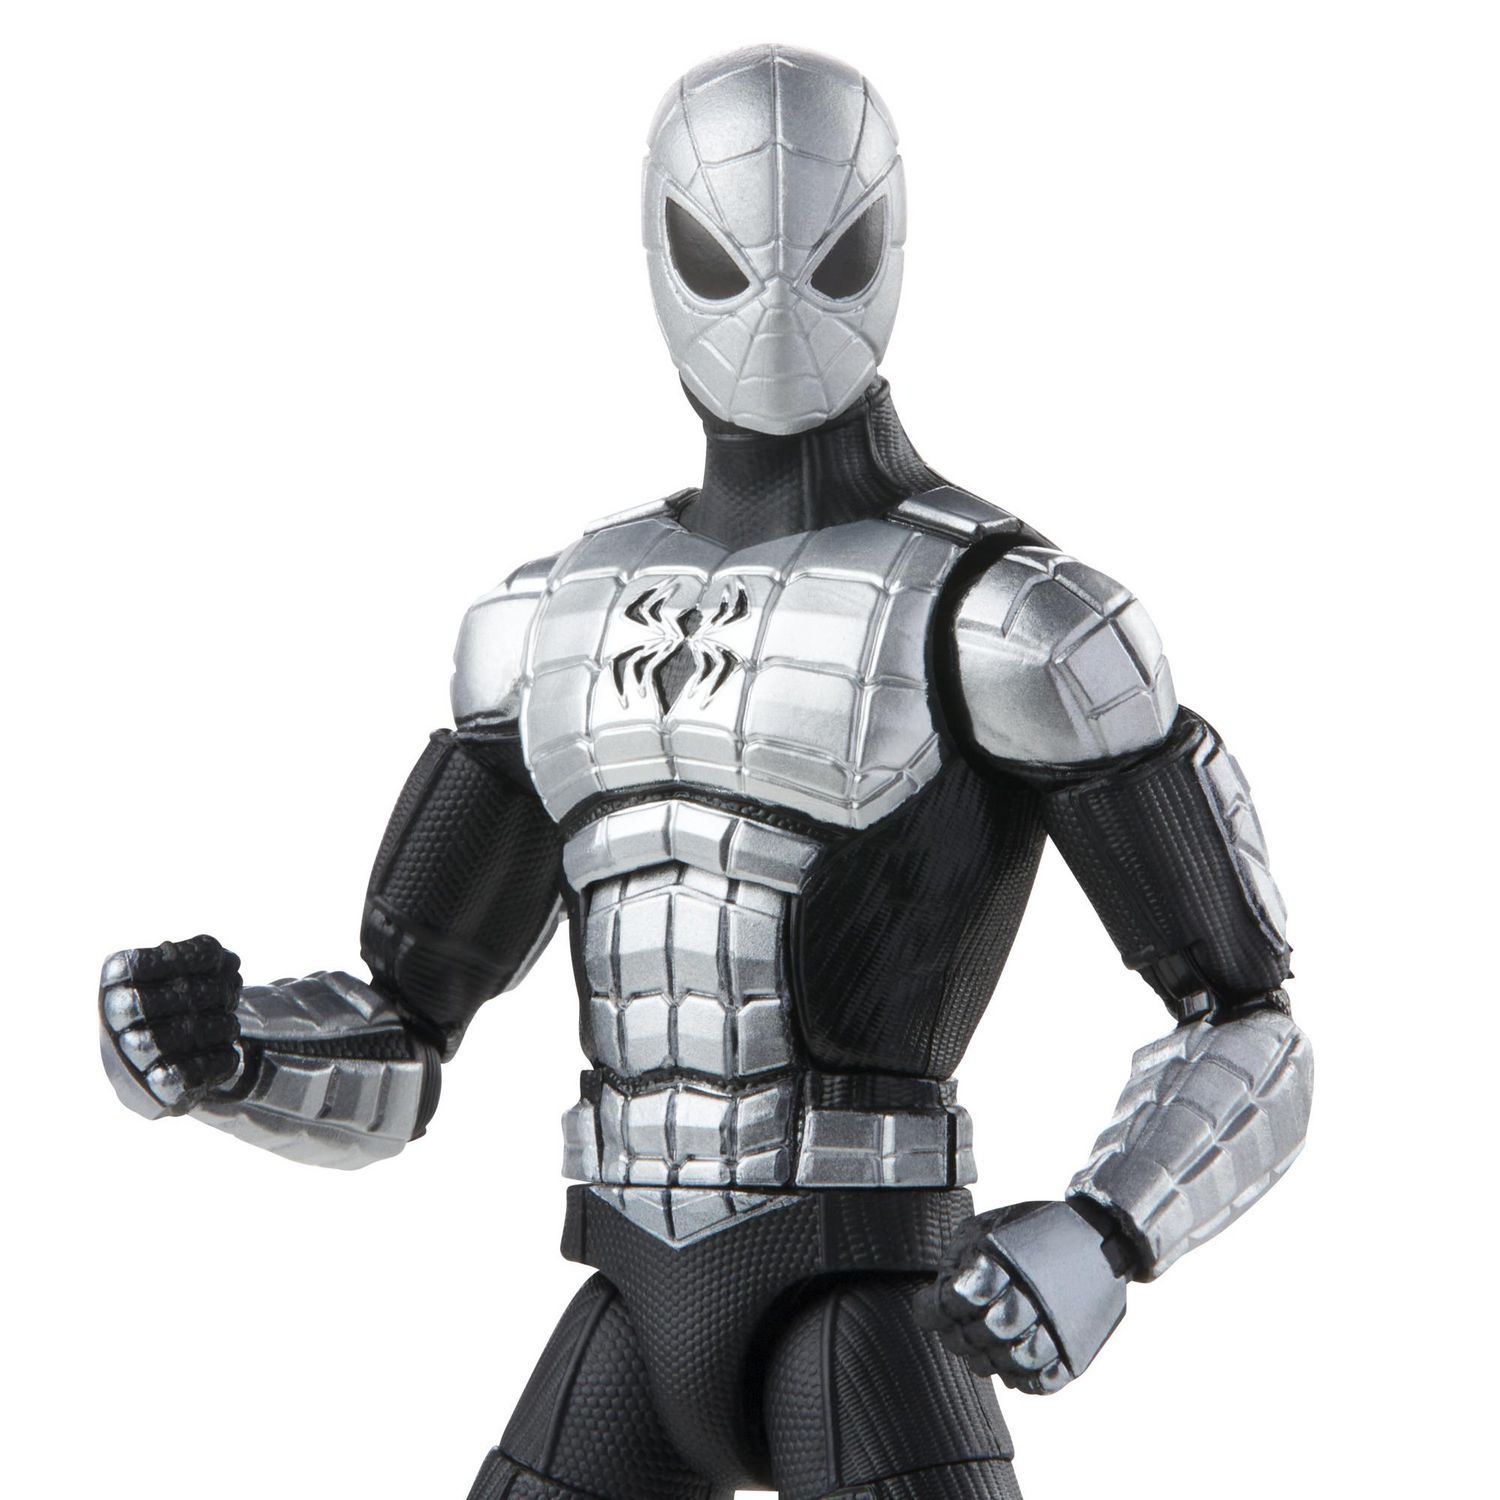 Marvel Legends Series Spider-Man 6-inch Spider-Armor Mk I Action Figure  Toy, Includes 4 Accessories: 2 Alternate Hands and 2 Web FX